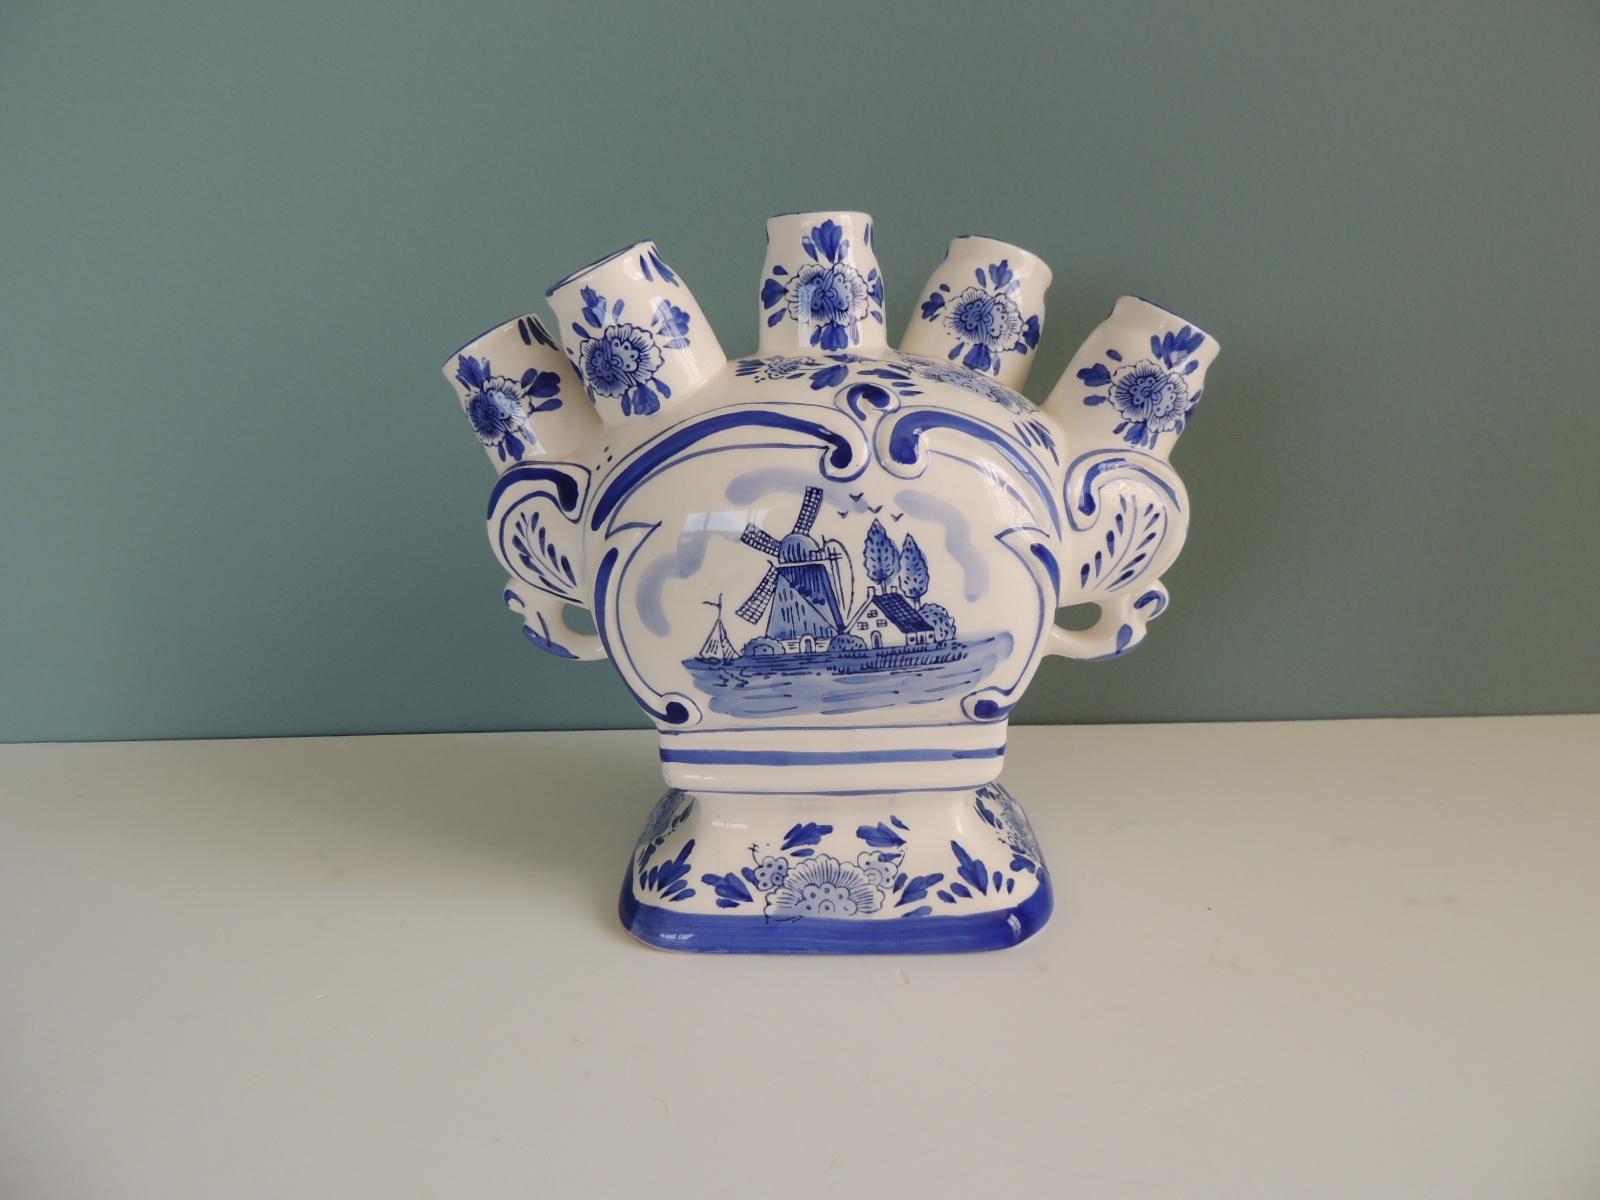 Blue and white ceramic hand painted tulipiere vase.
Size: 9